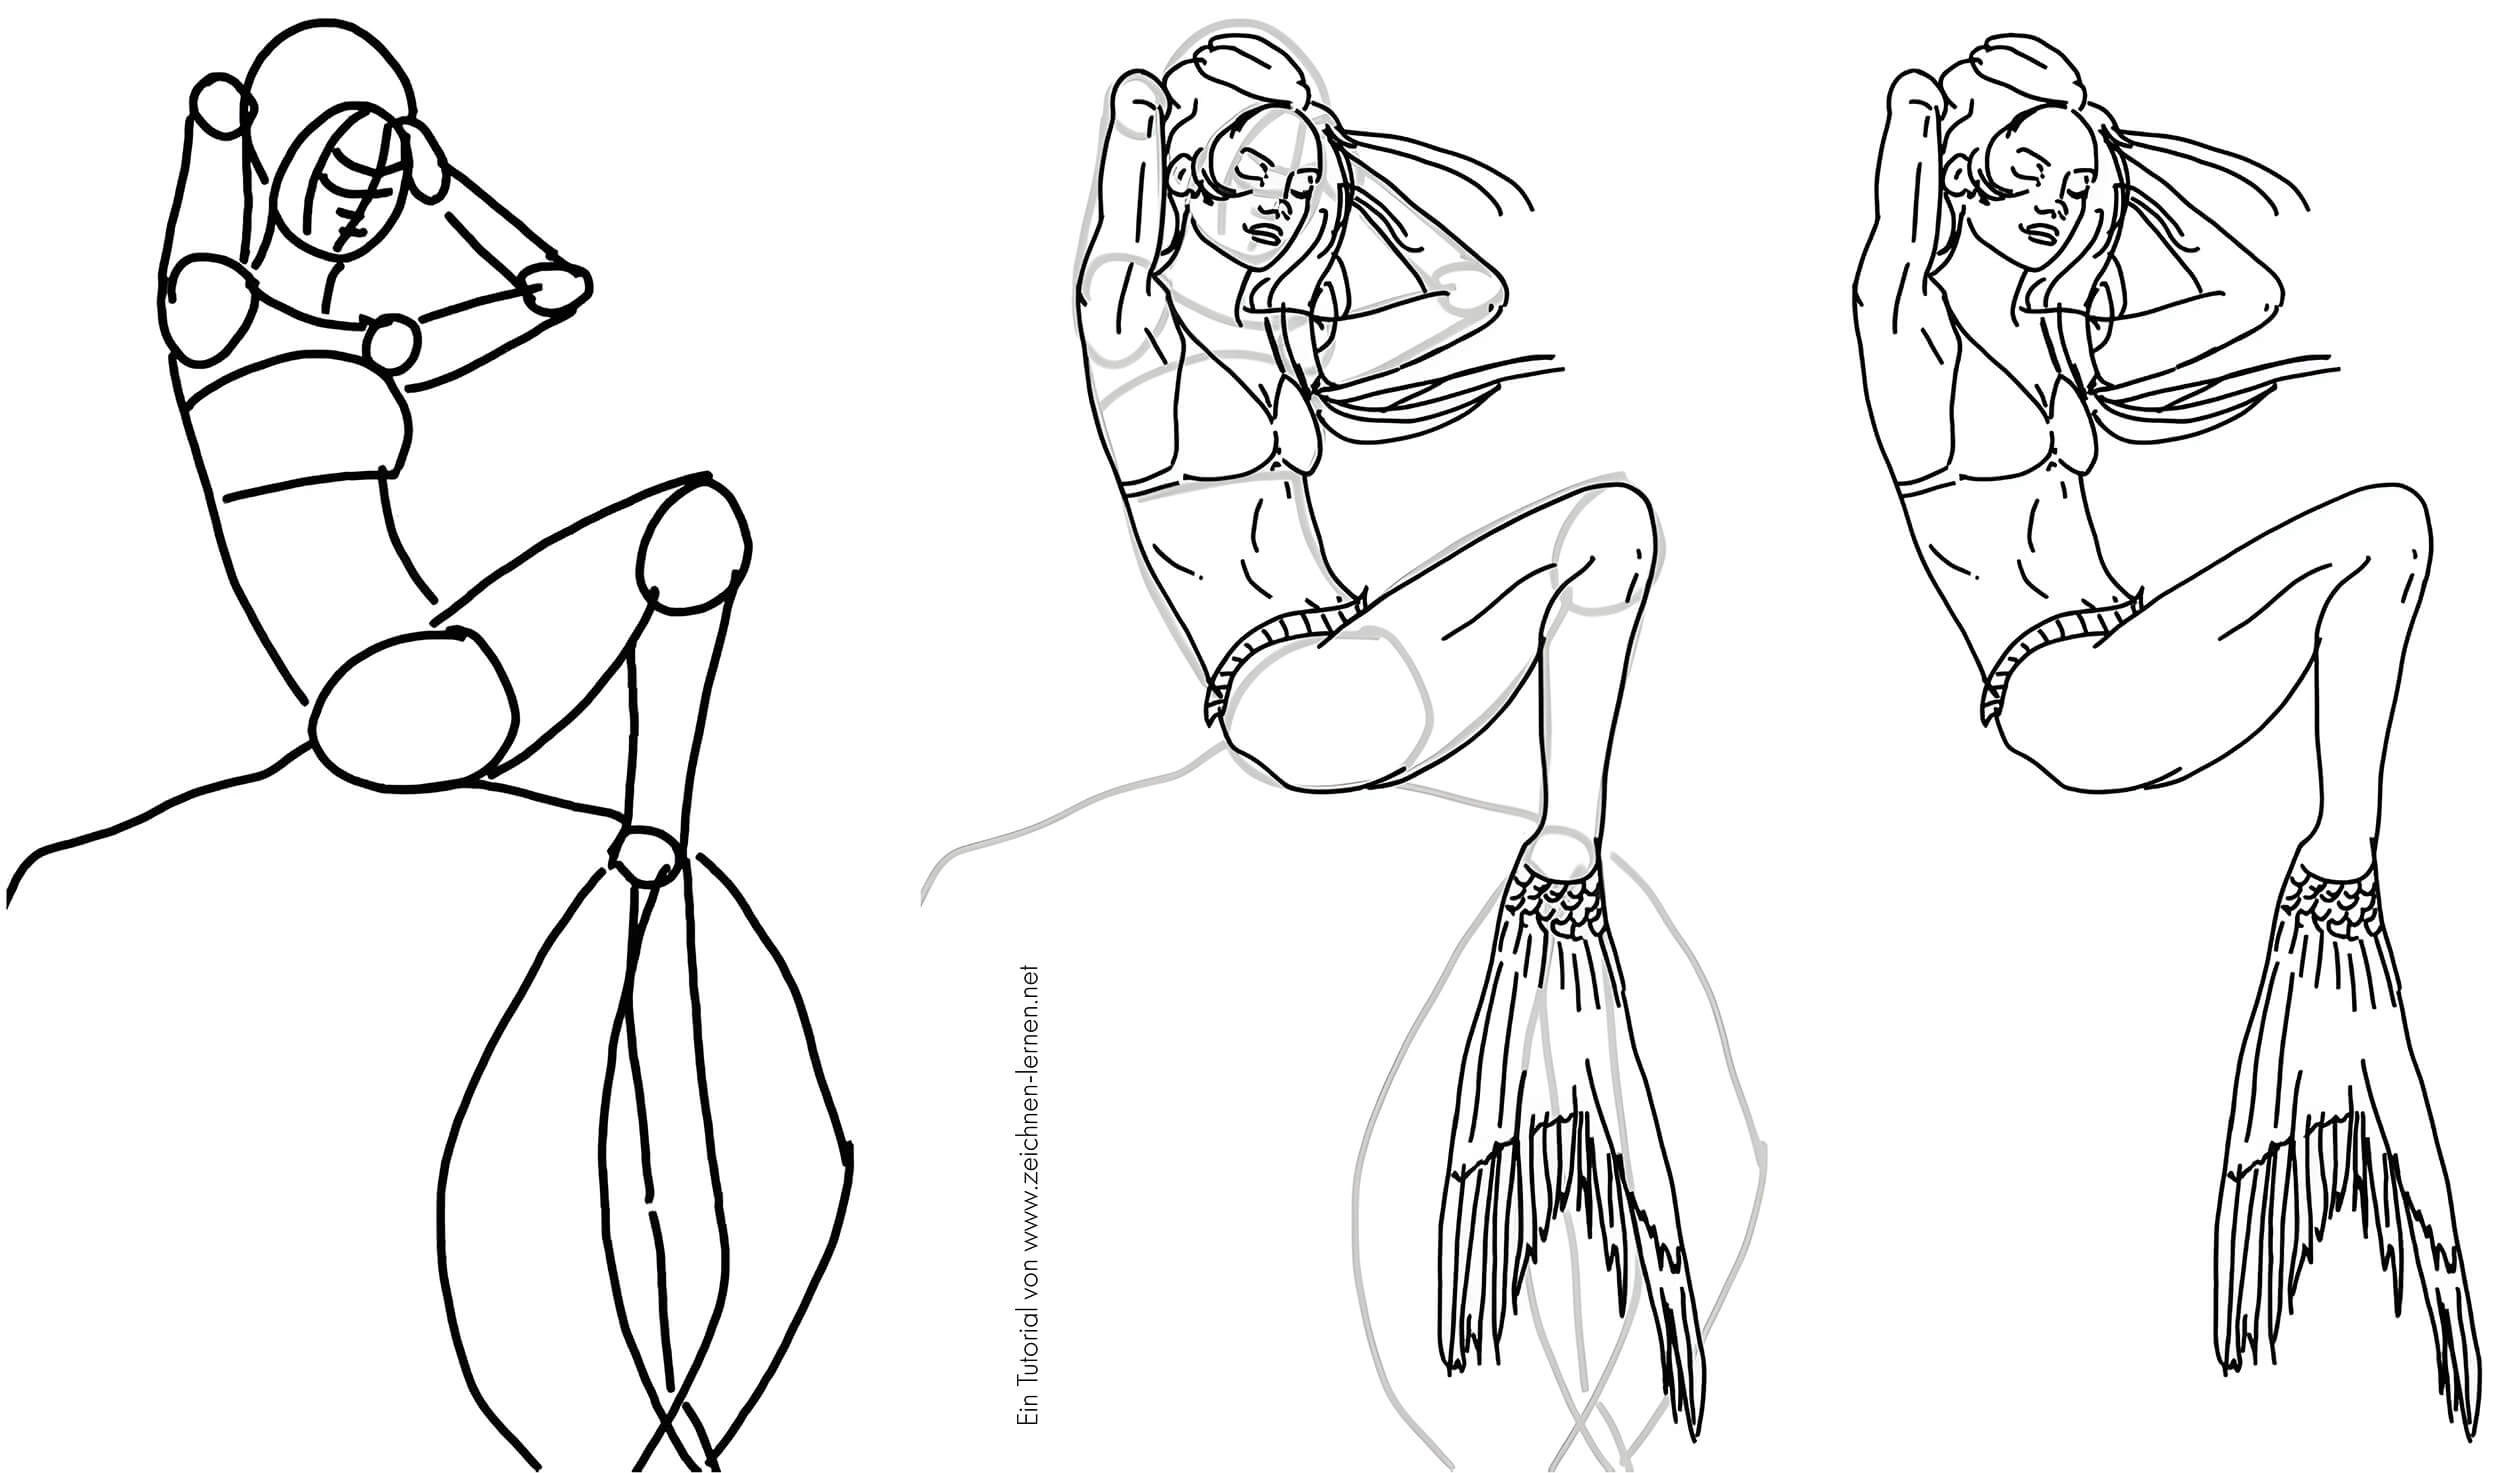 Learn to draw mermaids - mermaids and nymphs